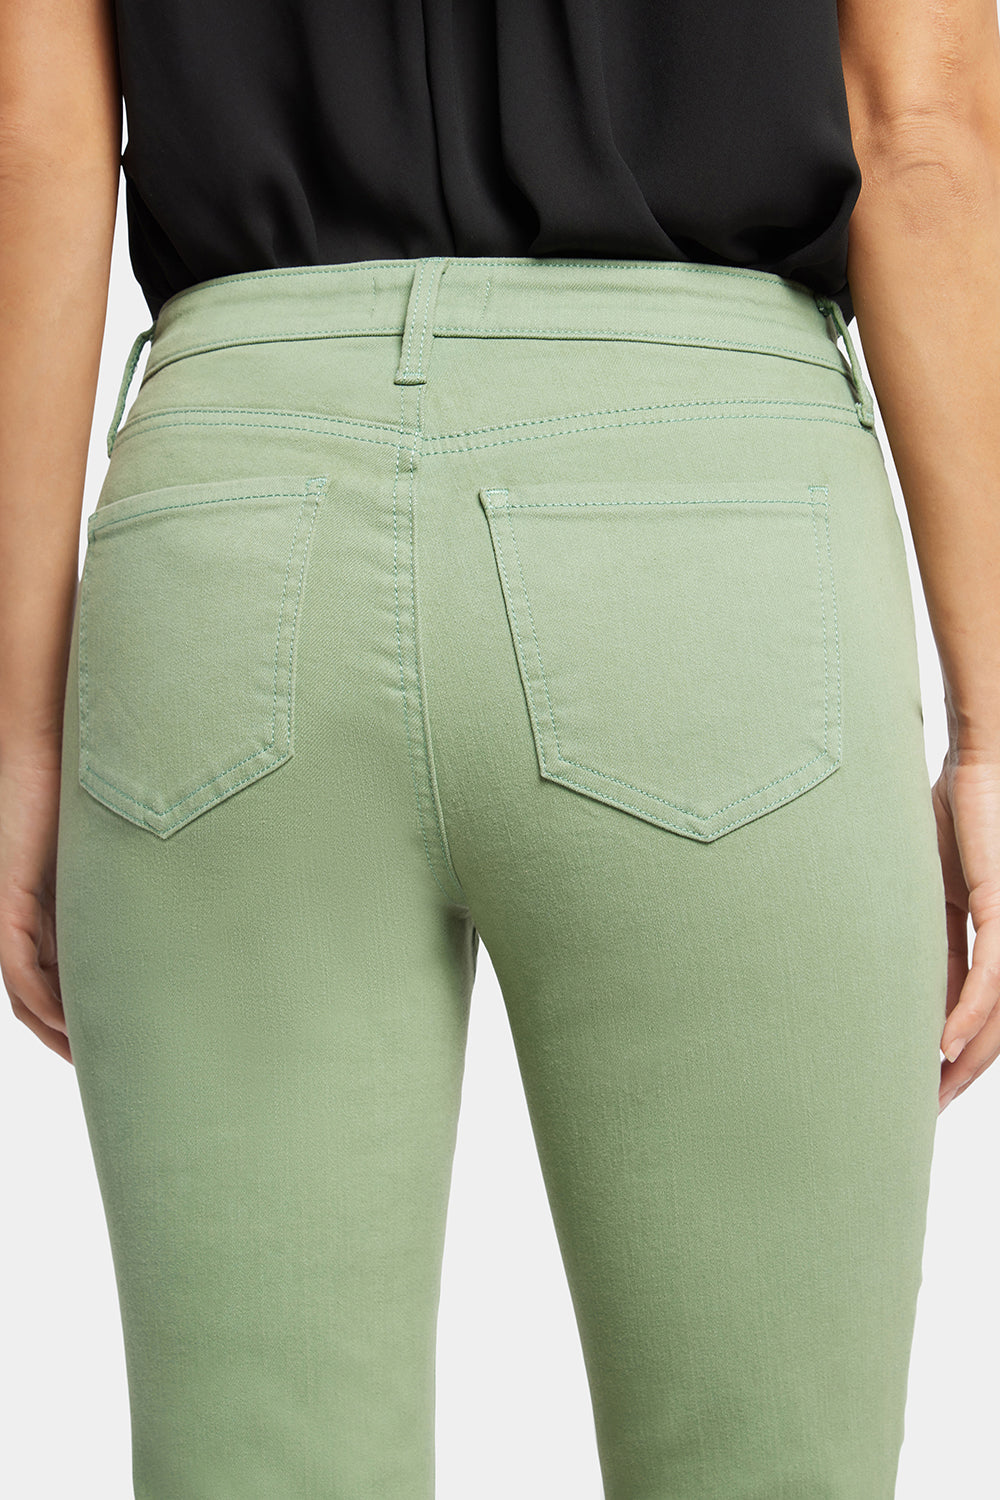 Chloe Skinny Capri Jeans In Plus Size In Cool Embrace® Denim With Roll  Cuffs - English Ivy Green